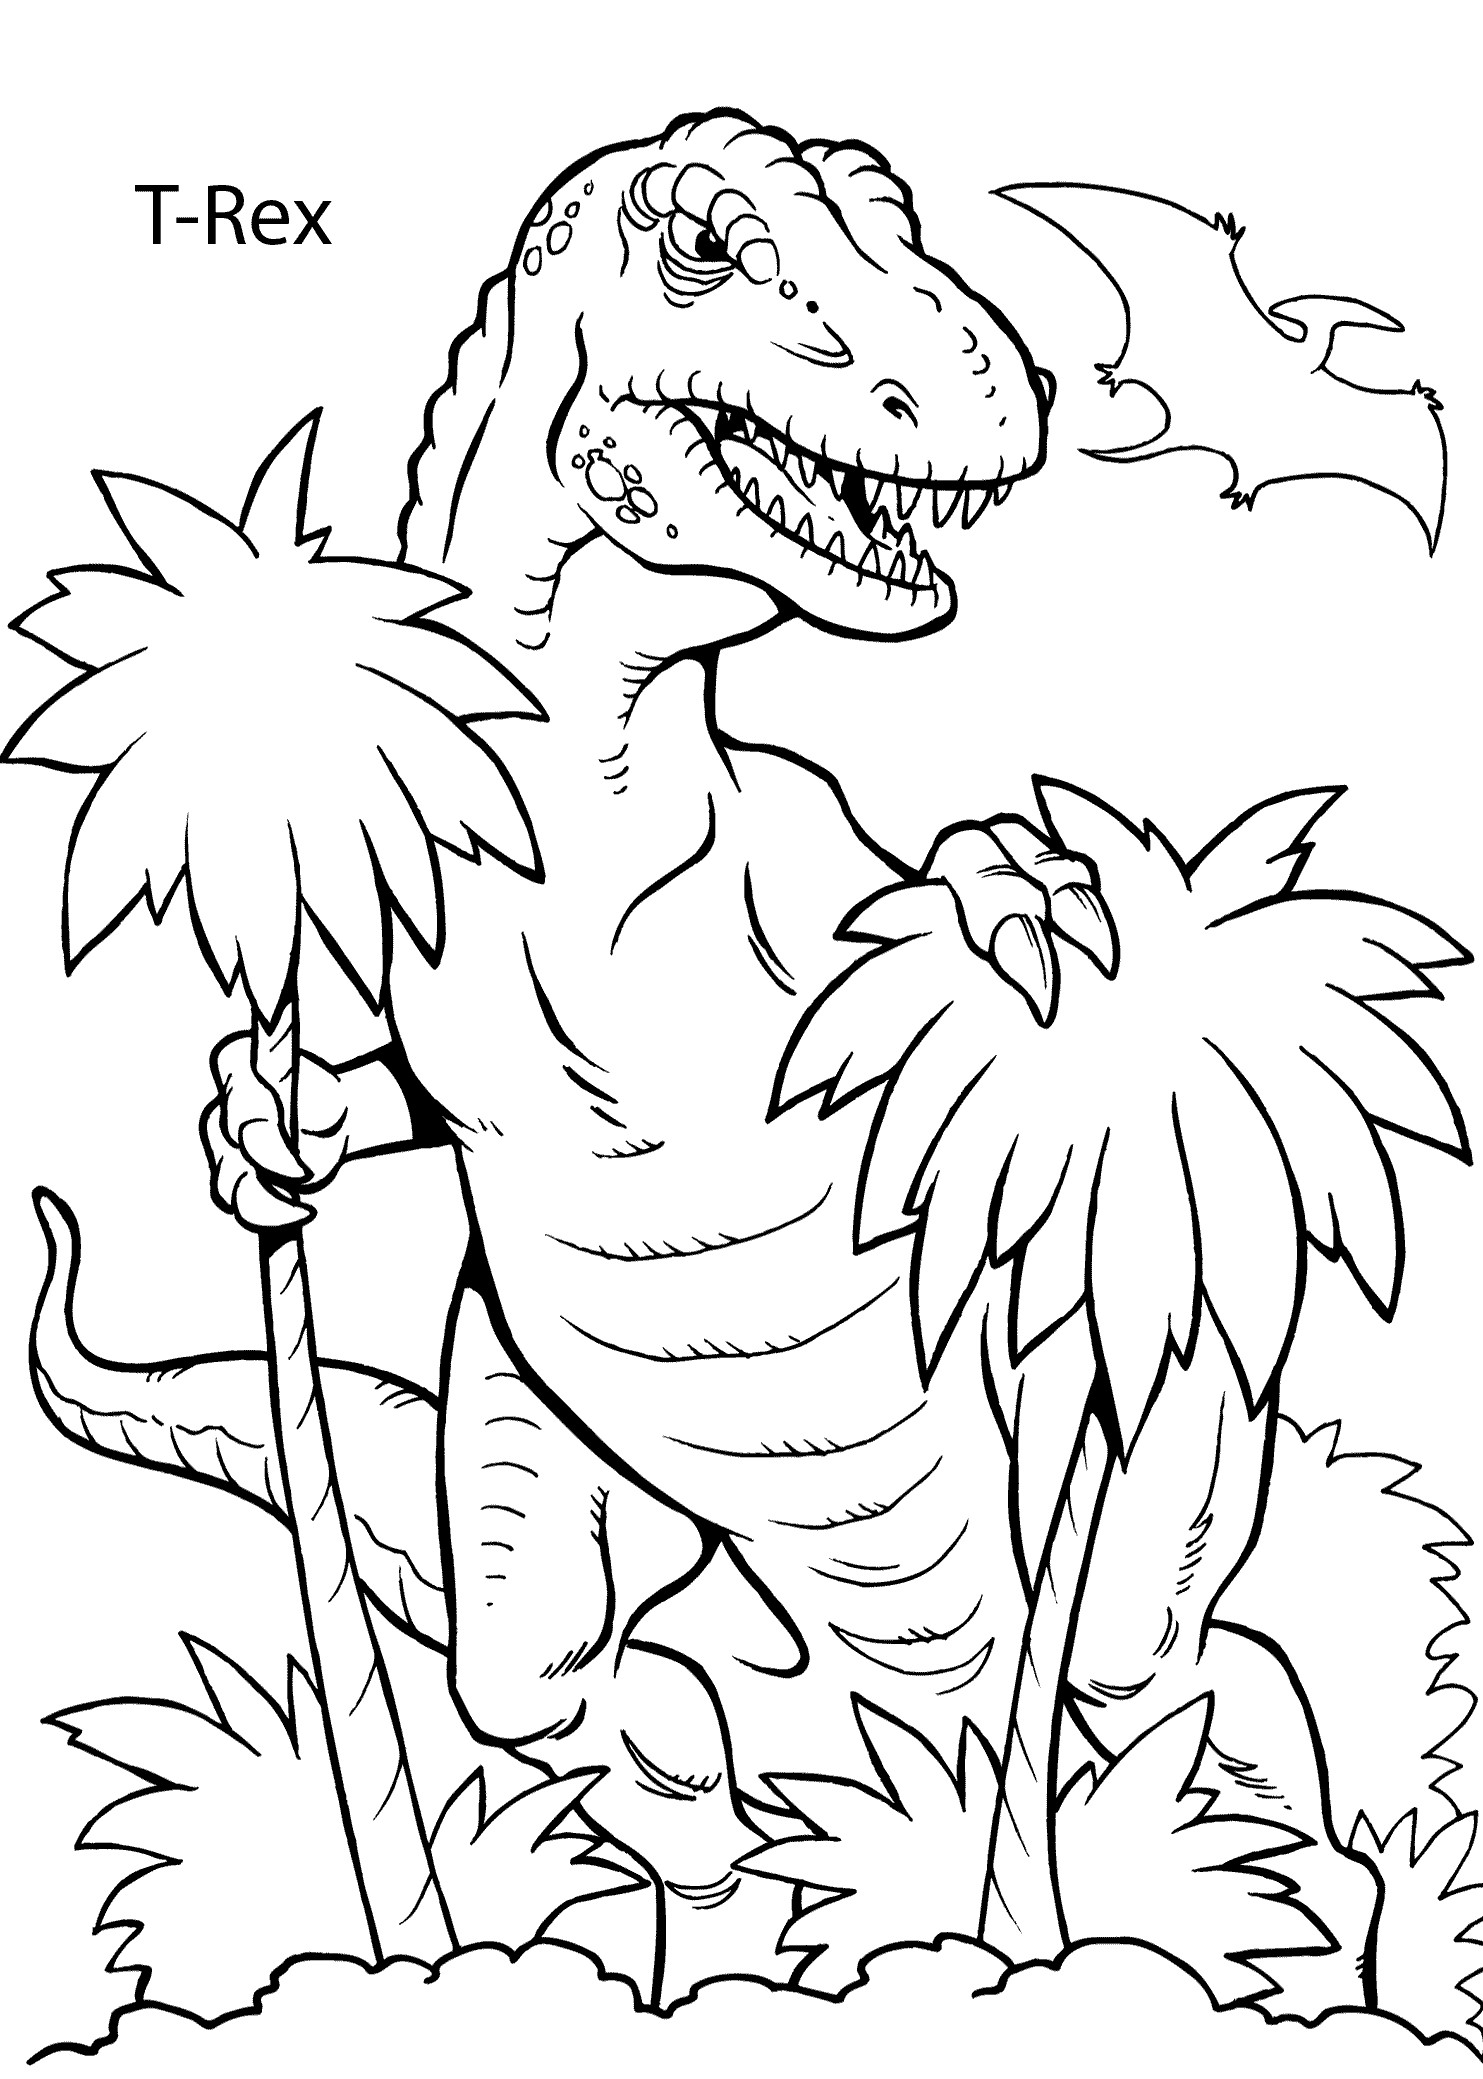 Dinosaur Coloring Pages For Kids
 T Rex dinosaur coloring pages for kids printable free